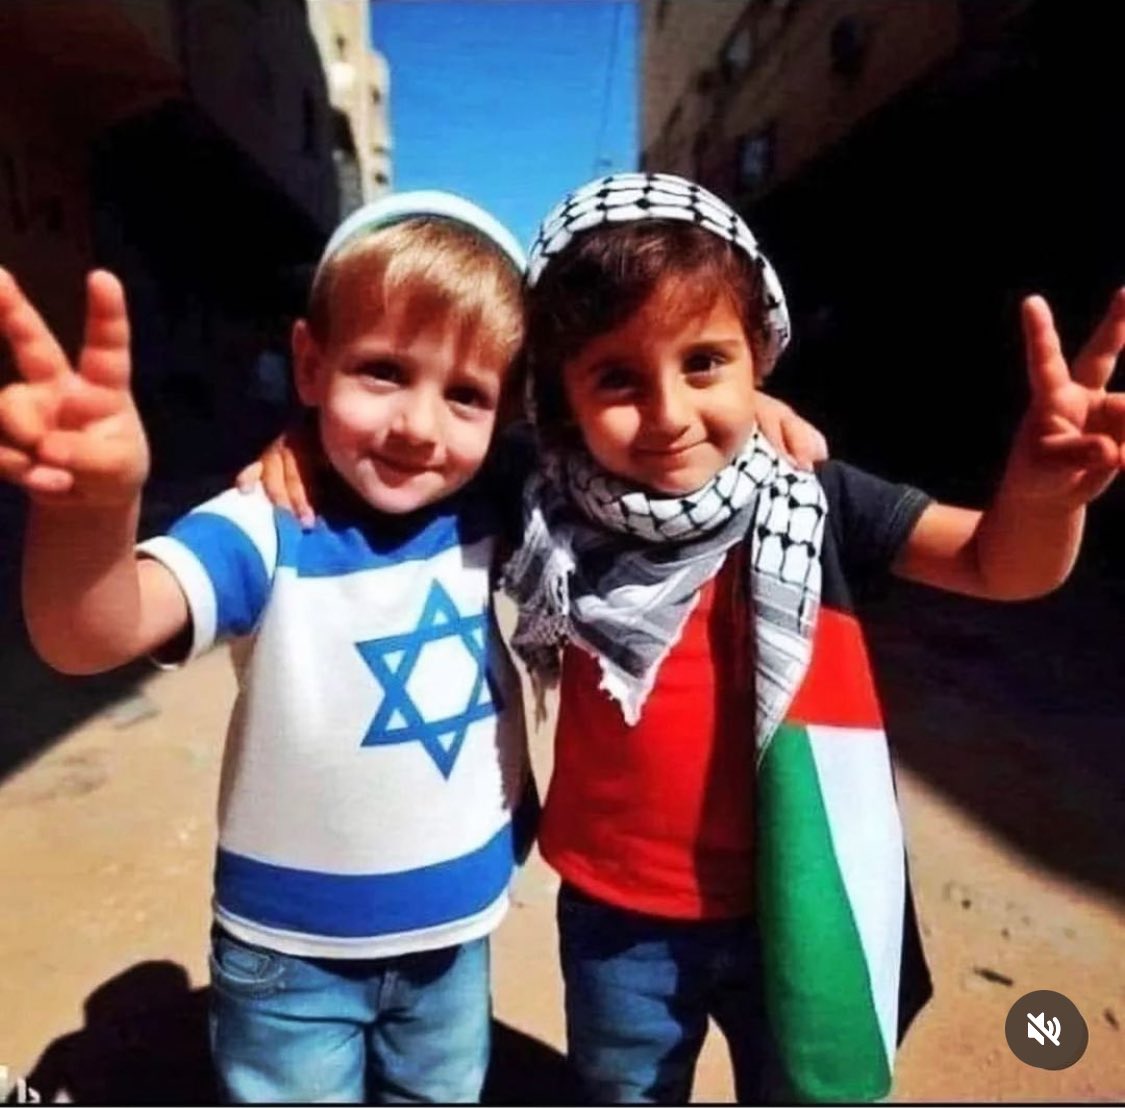 Children are the most peaceful and loving of us all! It’s adults that teach children to hate, that is a learned behavior. If you allowed a child to grow without teaching hate or shame, we’d have a great society! #Gaza #peaceispossible #Peace #PeaceAndLove #PeaceNotWar #Kennedy24